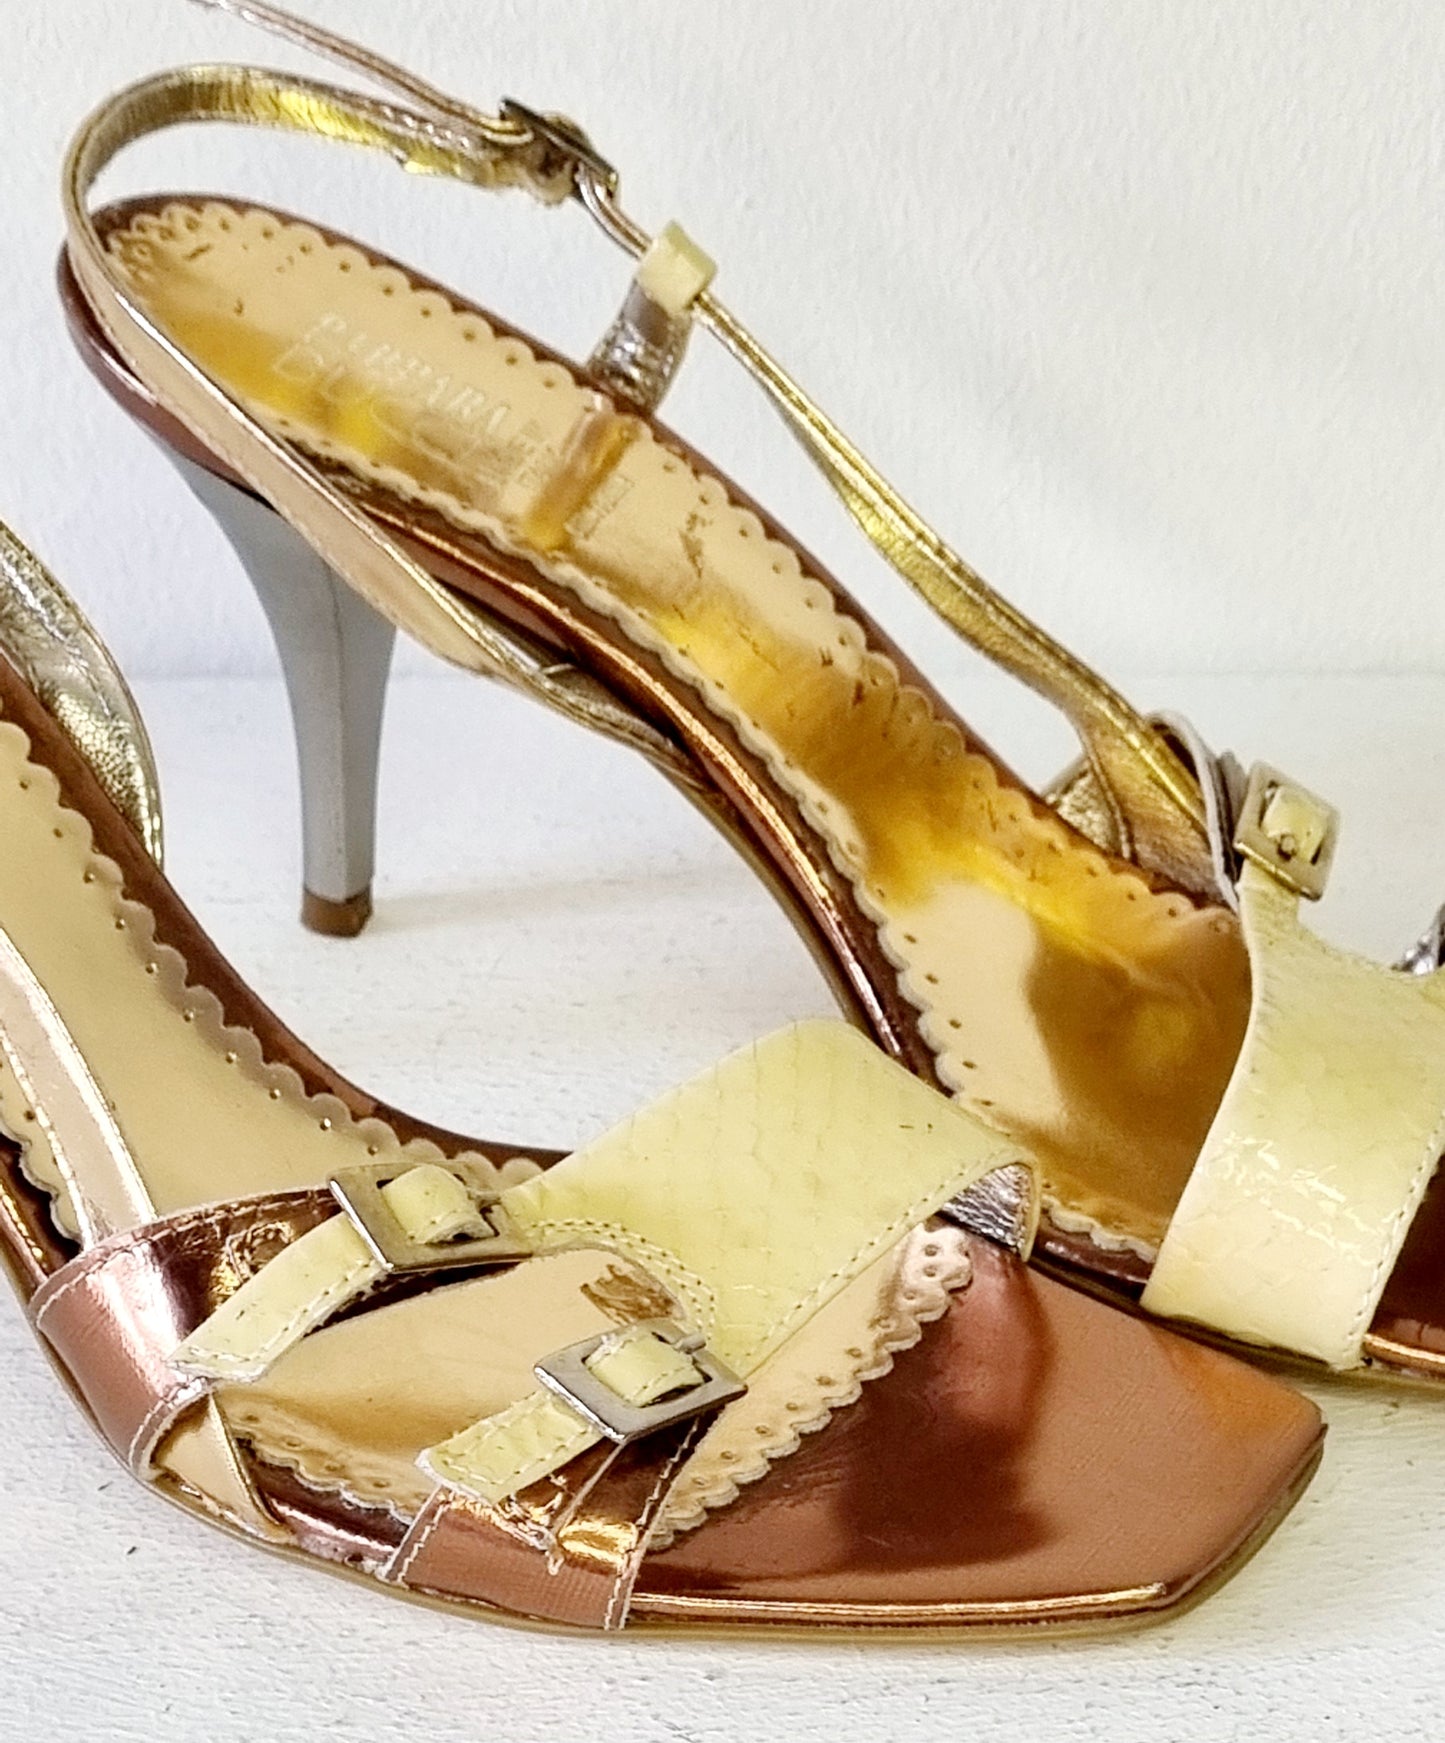 Barbara Bucci - Vera Pelle made in Italy - Gold Upper And Silver Heeled Designer Vintage Sandals